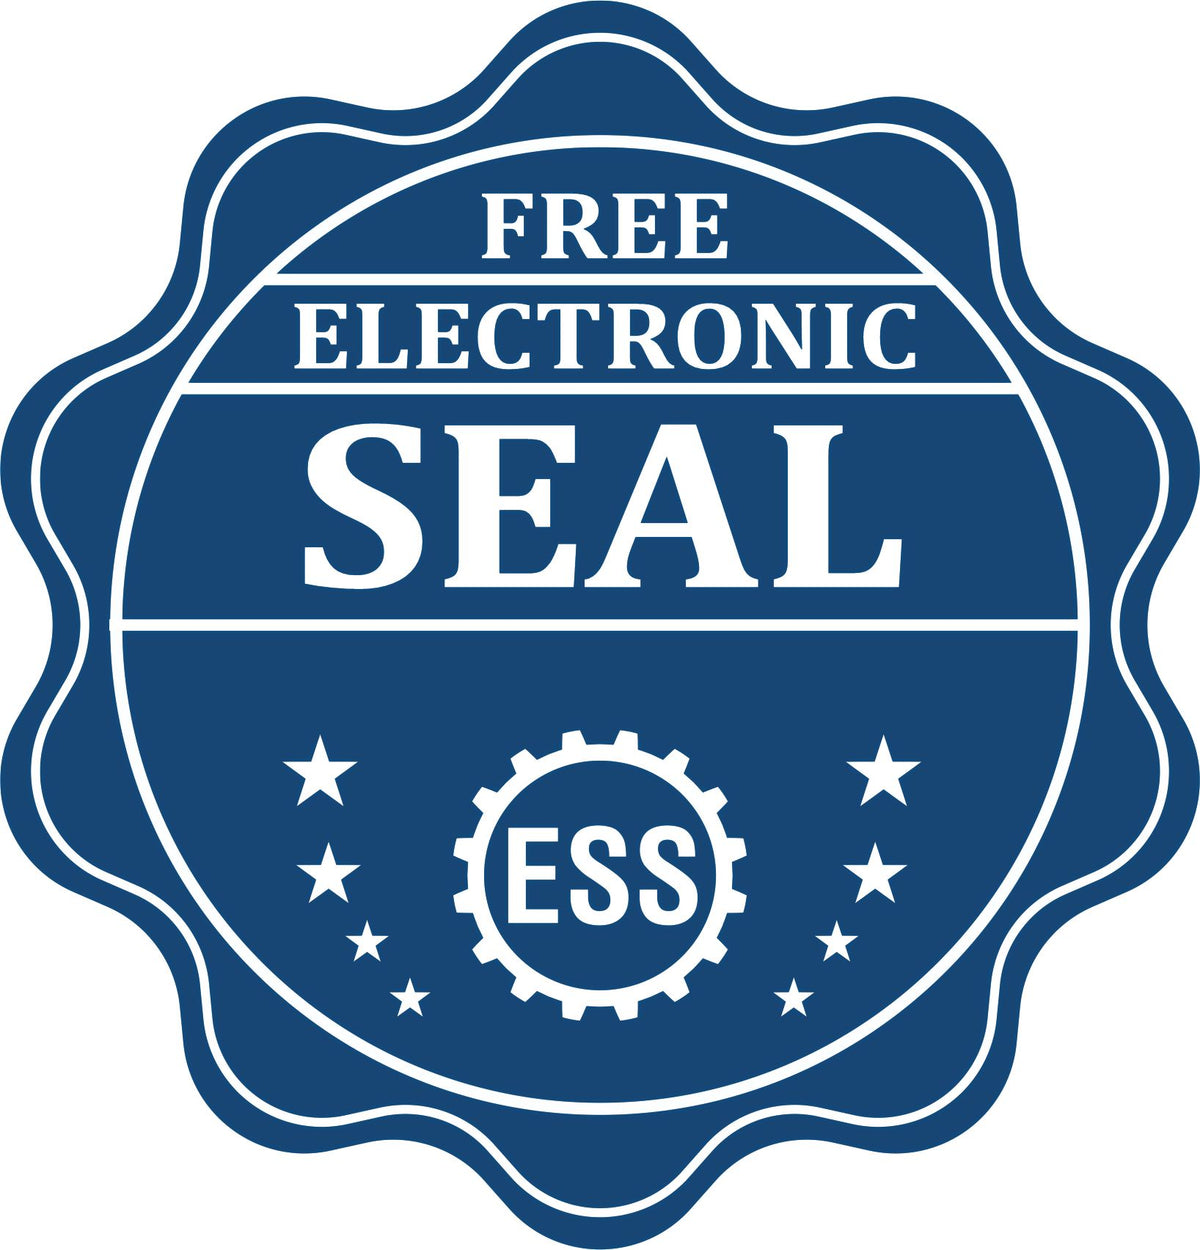 A badge showing a free electronic seal for the Hybrid Alaska Land Surveyor Seal with stars and the ESS gear on the emblem.